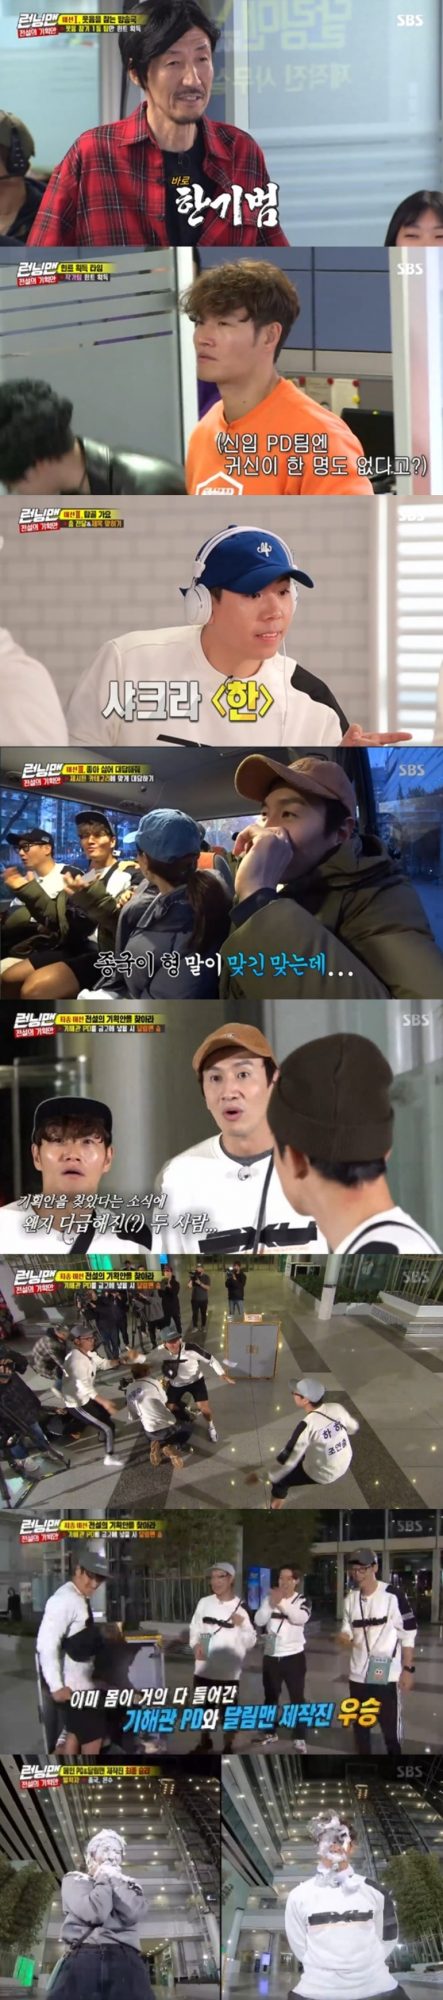 The Identity of SBS Running Man was Seo Eun-soo and Kim Jong-kook.According to Nielsen Korea, a TV viewer rating research institute, Running Man, which was broadcast on the 24th, recorded 4.0% of 2049 target TV viewer ratings (based on the second part of the Seoul metropolitan areas furniture TV viewer ratings), which is an indicator of topicality, and recorded MBCs Masked Wang and KBS2s Ears of Donkey Ears. He was in first place.The average TV viewer ratings were 5.7% in the first part and 7.5% in the second part, while the highest TV viewer ratings per minute rose to 9.2%.The broadcast was decorated with the Legendary Plan Race after last week, and the members searched for the Identity of Kolock and the other.With Godseven camp, actors Seo Eun-soo, Choi Lee and comedian Hur Kyung-hwan as guests, the members were divided into PD, writer and new PD team of the Running Man program and challenged the first mission, the Broadcasting Station for Laughing.Members could not bear to laugh at the extraordinary makeup from the melon navel tool uncle to the head of the Yondu.One more example, which appeared last time in Laughing Inclusion Race, appeared again and took a disassembled laughing bomb with a three-member new girl group Hans Band.Through the hints obtained by the least laughing writer team, I realized that the new PD team had no collocide with Kollok.The second mission, Topgol Song, was a game that choreographed the hit song. The members failed to get a hint.In the third round, Kollock and the other members were looking for clues in the station, and Kollock and the other members had to be eliminated.Starting with Chois elimination, which had been suspected of everyone, Jeon So-min, Song Ji-hyo and Yang Se-chan were in-N-Out Burger.Yoo Jae-Suk made In-N-Out Burger of Collock Seo Eun-soo based on the hint of Adjunct is a woman.Kim Jong-kook and Lee Kwang-soo have clashed with the Identity of the Pick now.Lee Kwang-soo found out that the main PD had to go inside the safe and succeeded in the final mission.Kim Jong-kook and Seo Eun-soo were punished for fresh cream as they ended with the victory of the Ralim Man crew.